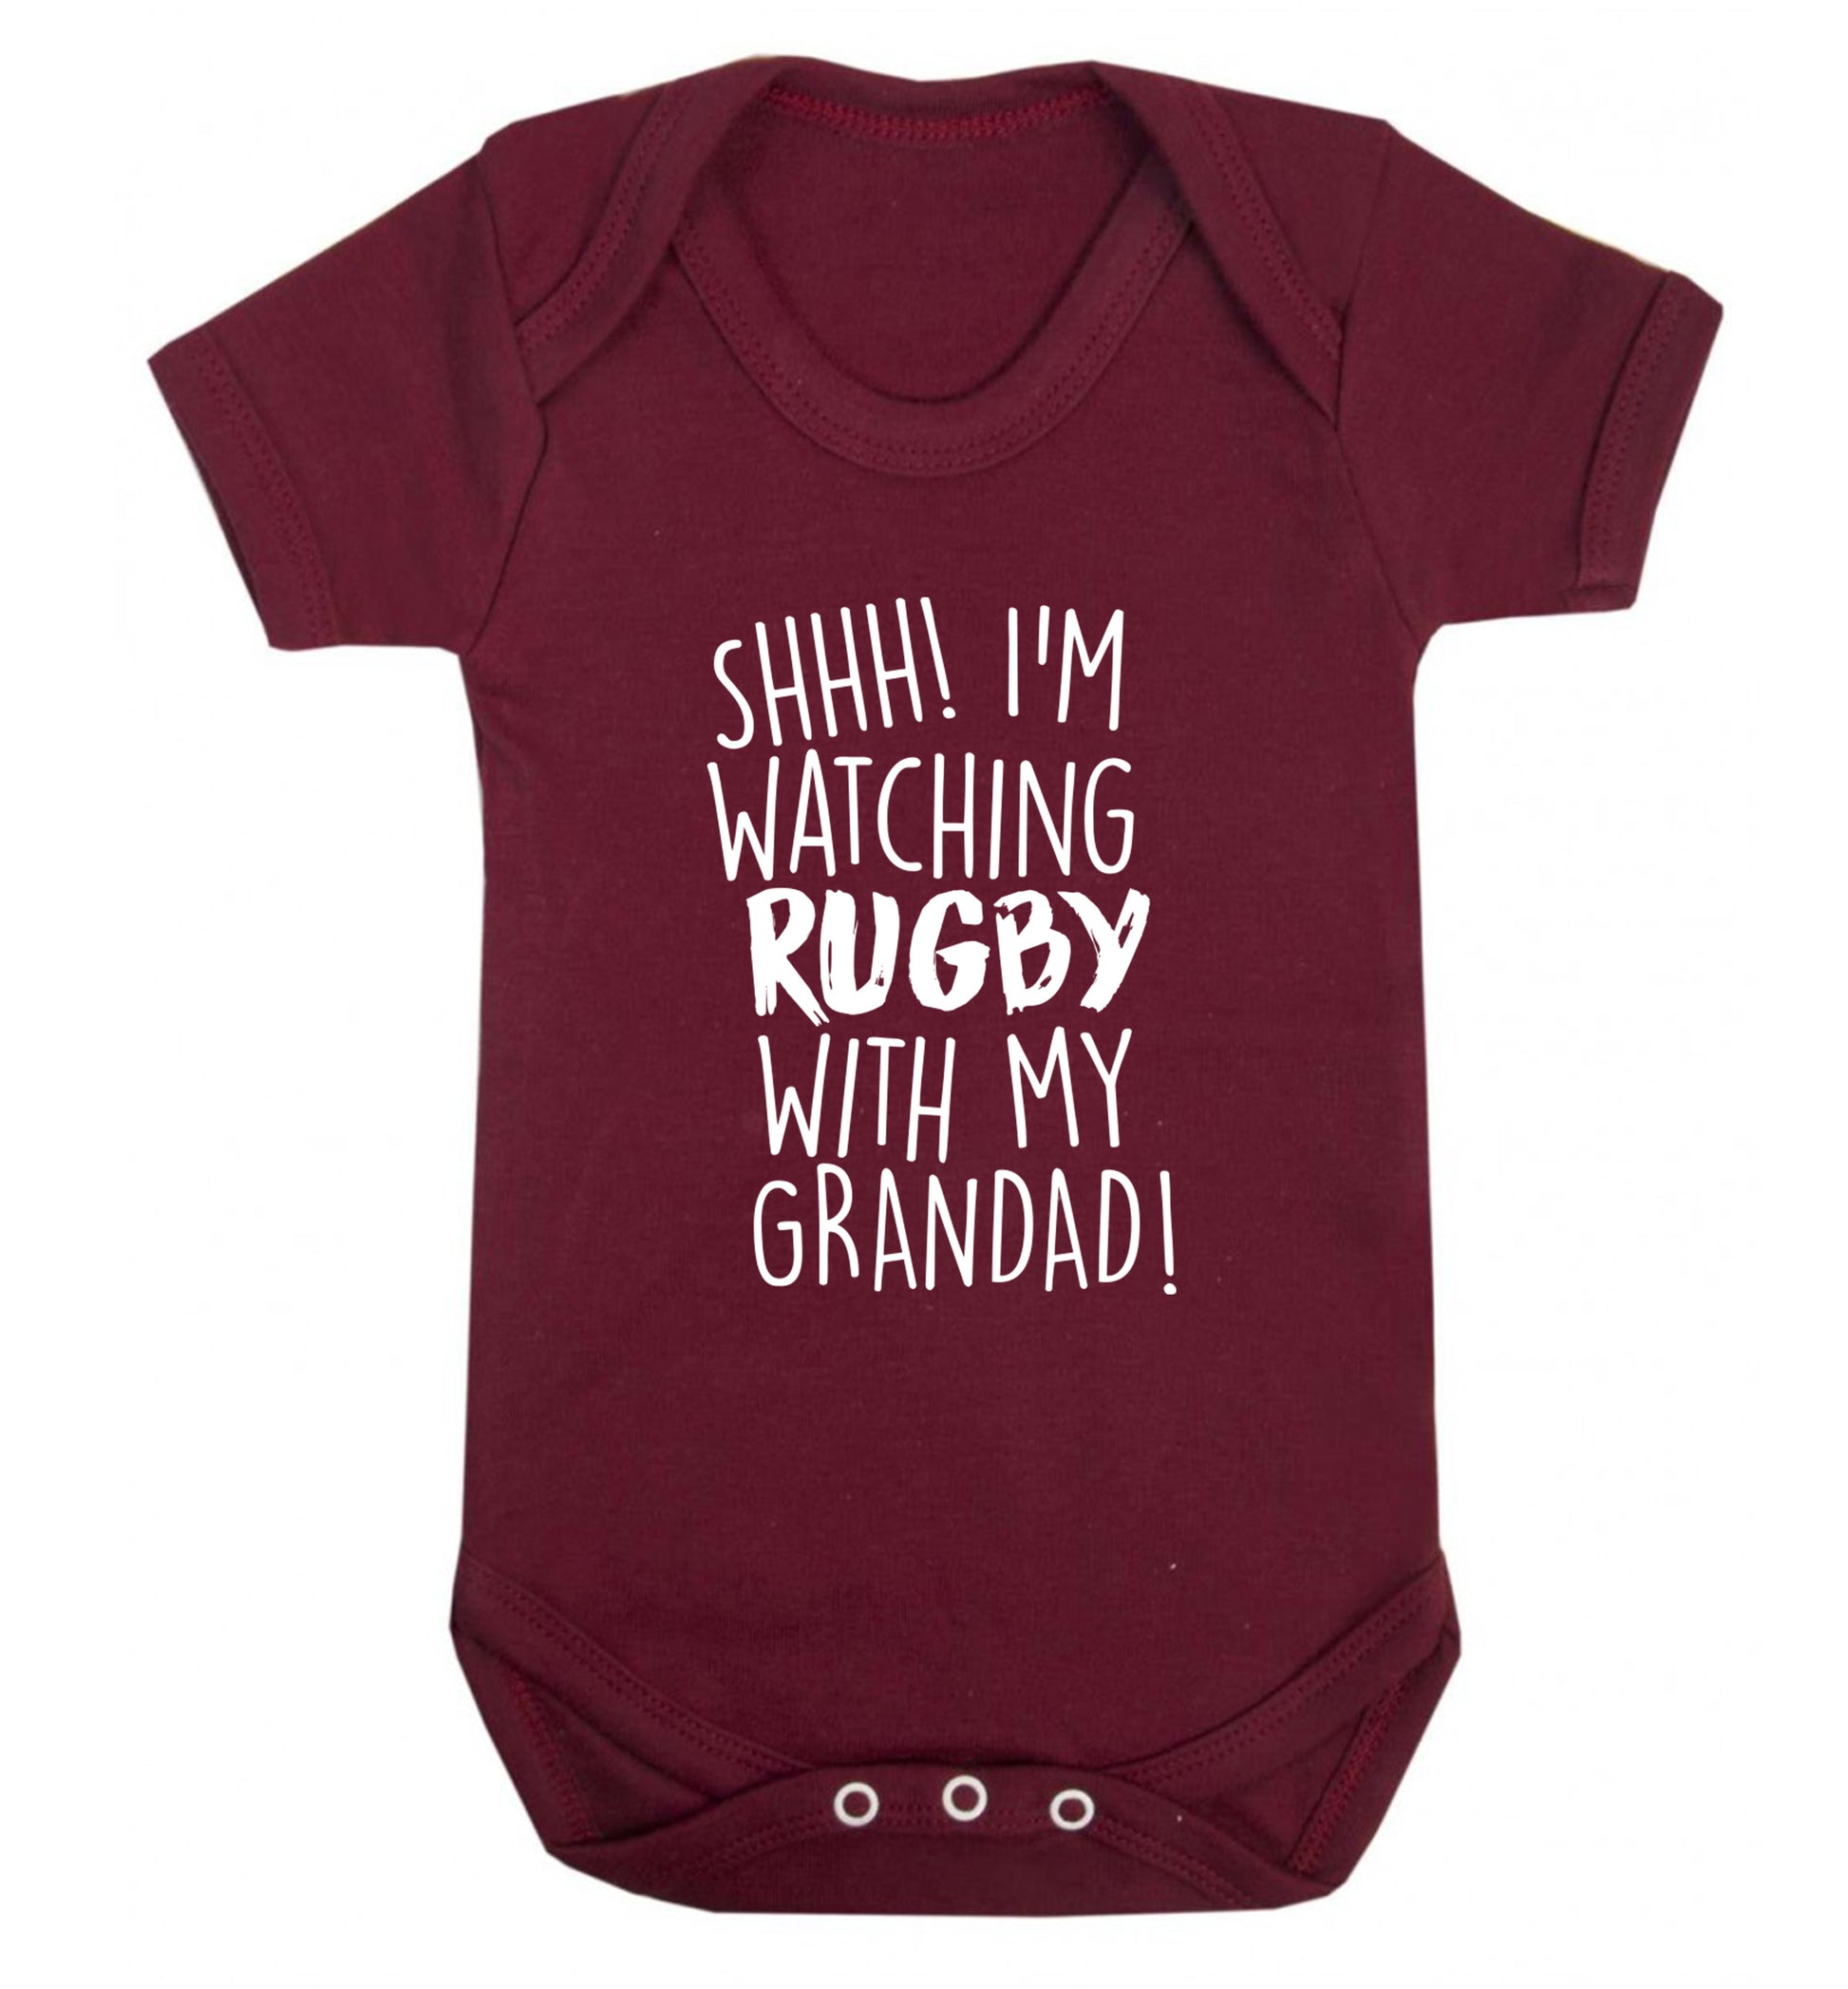 Shh I'm watching rugby with my grandad Baby Vest maroon 18-24 months